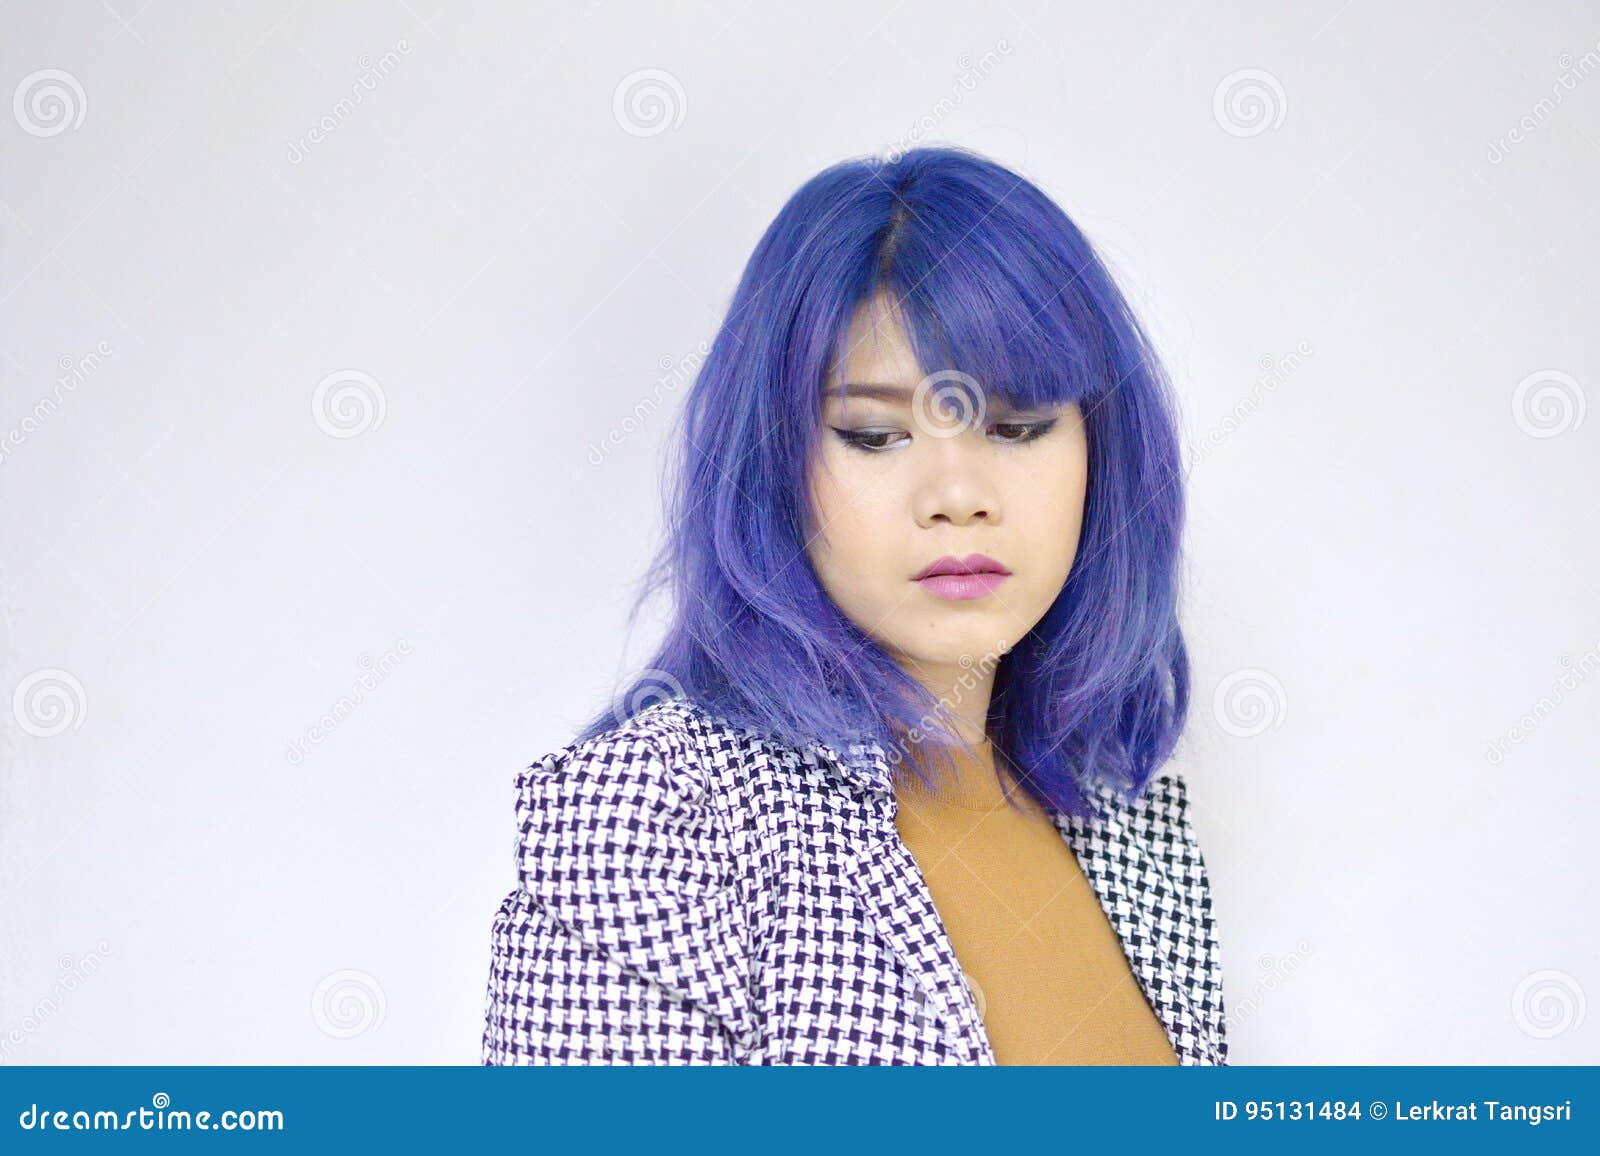 How to Achieve Long Light Blue Hair on Asian Hair - wide 9